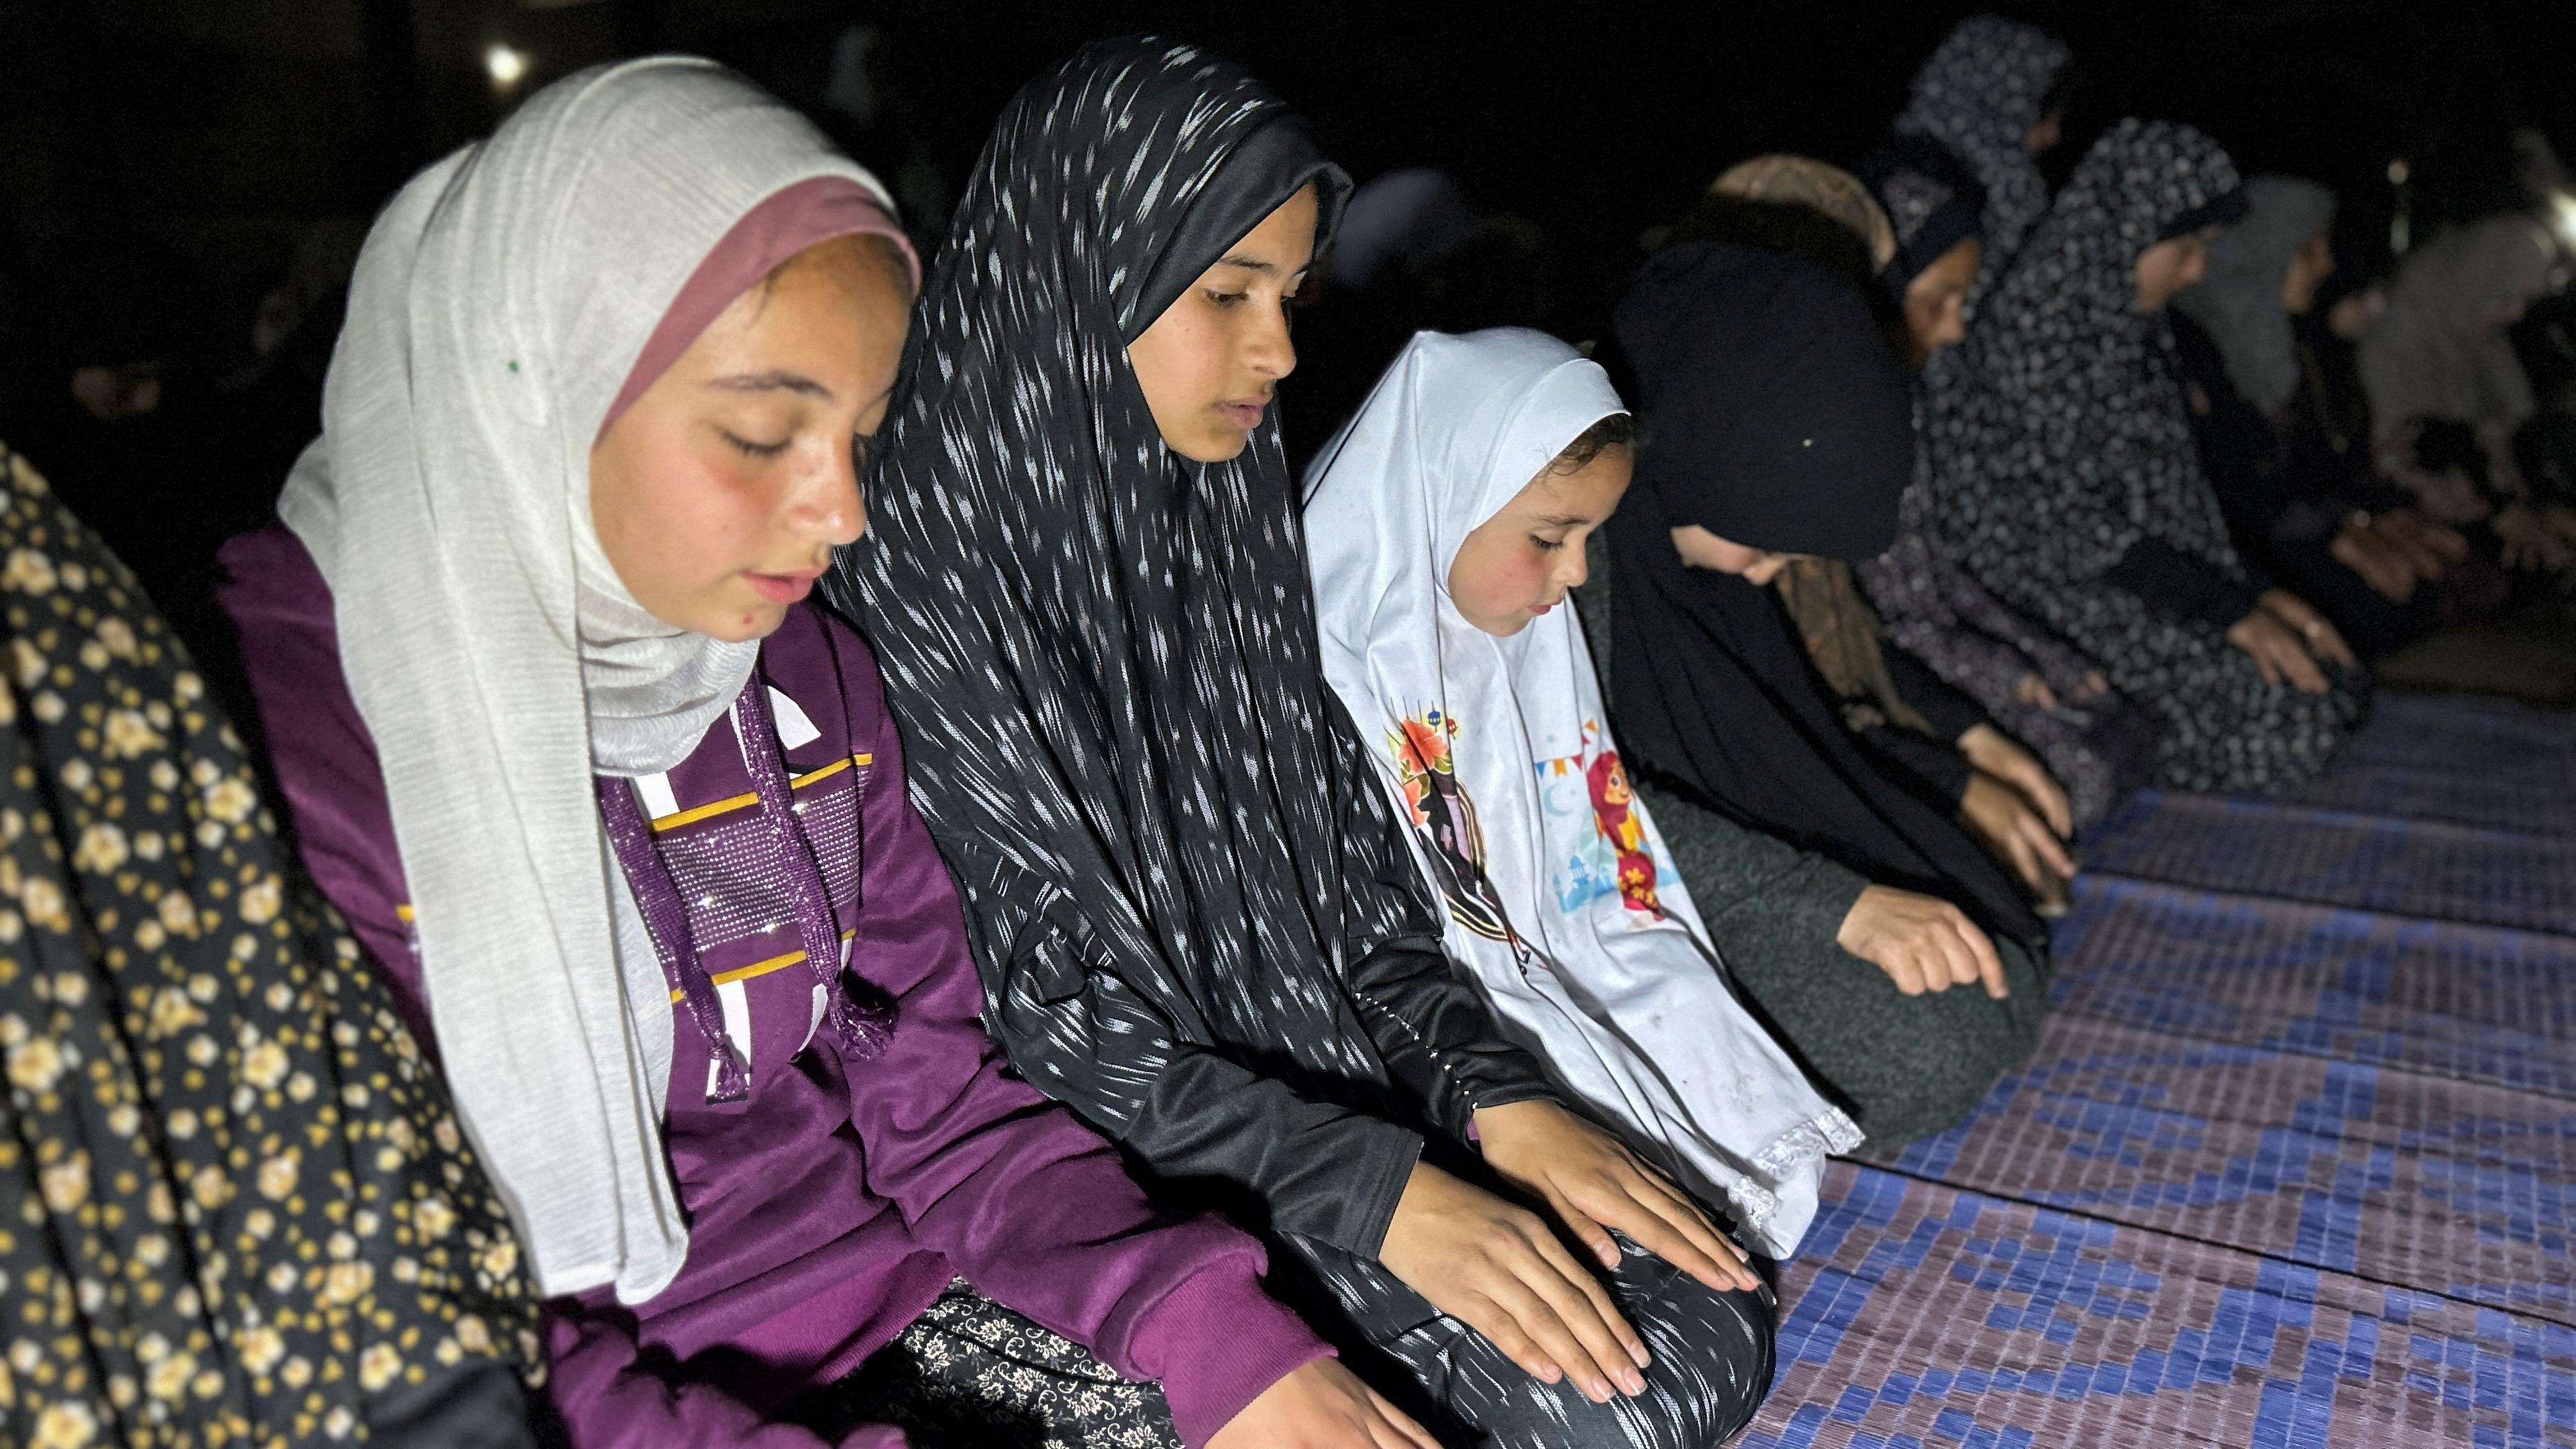 Palestinians perform Taraweeh prayers at a school during the holy month of Ramadan, as the conflict between Israel and Hamas con